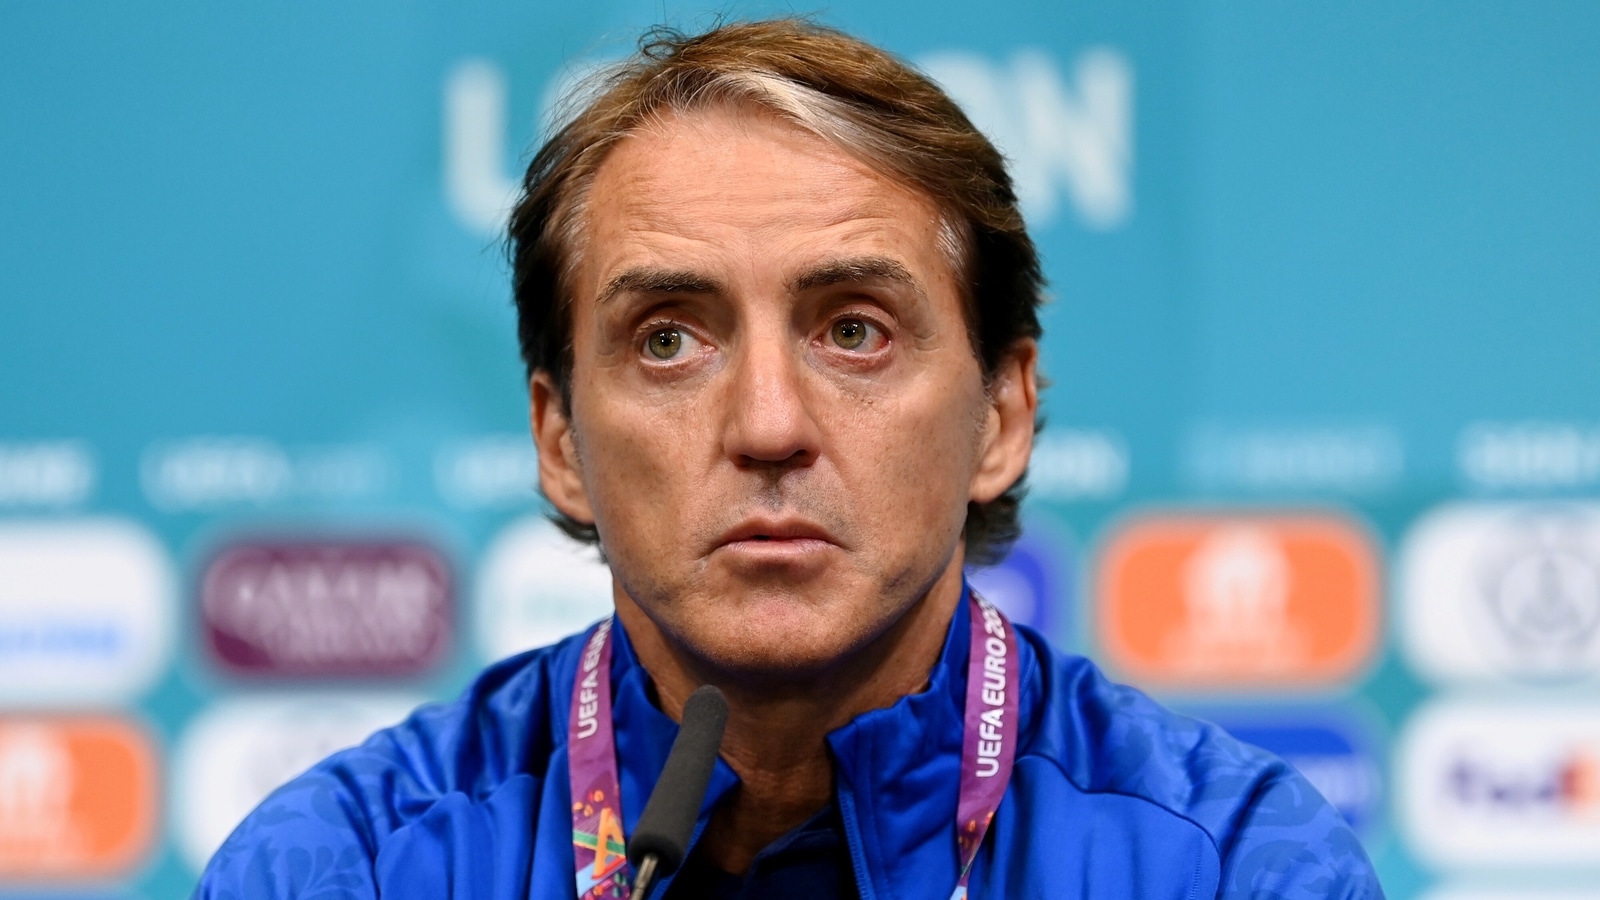 Italy vs Spain Euro 2020 semifinal: Mancini lauds Spanish coach and  youngsters | Football News - Hindustan Times